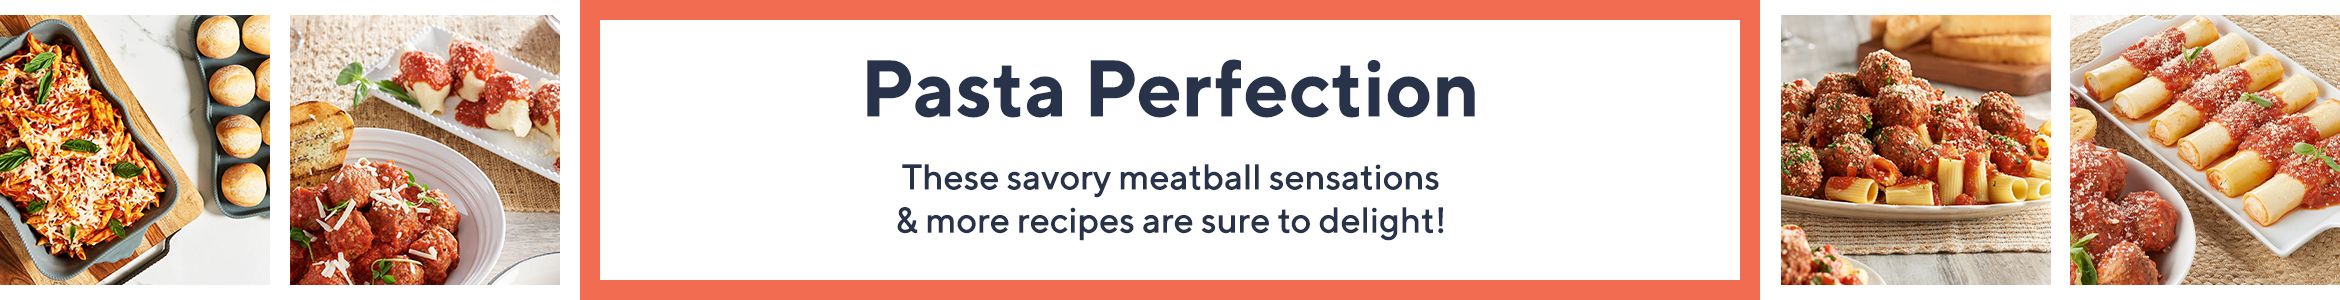 Pasta Perfection  These savory meatball sensations & more recipes are sure to delight!